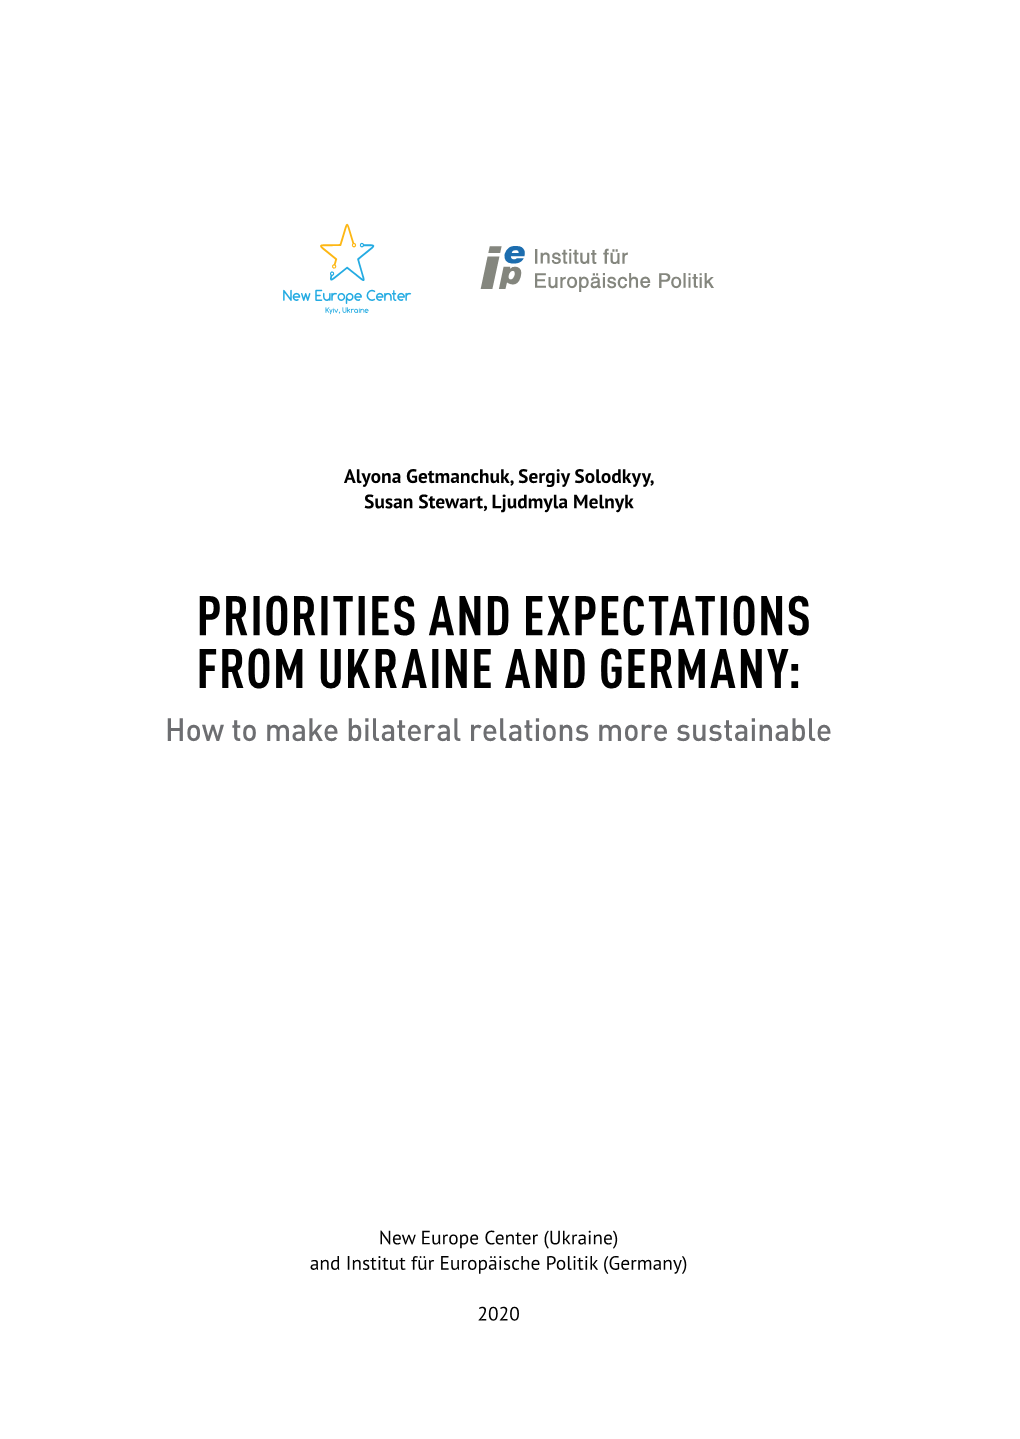 PRIORITIES and EXPECTATIONS from UKRAINE and GERMANY: How to Make Bilateral Relations More Sustainable